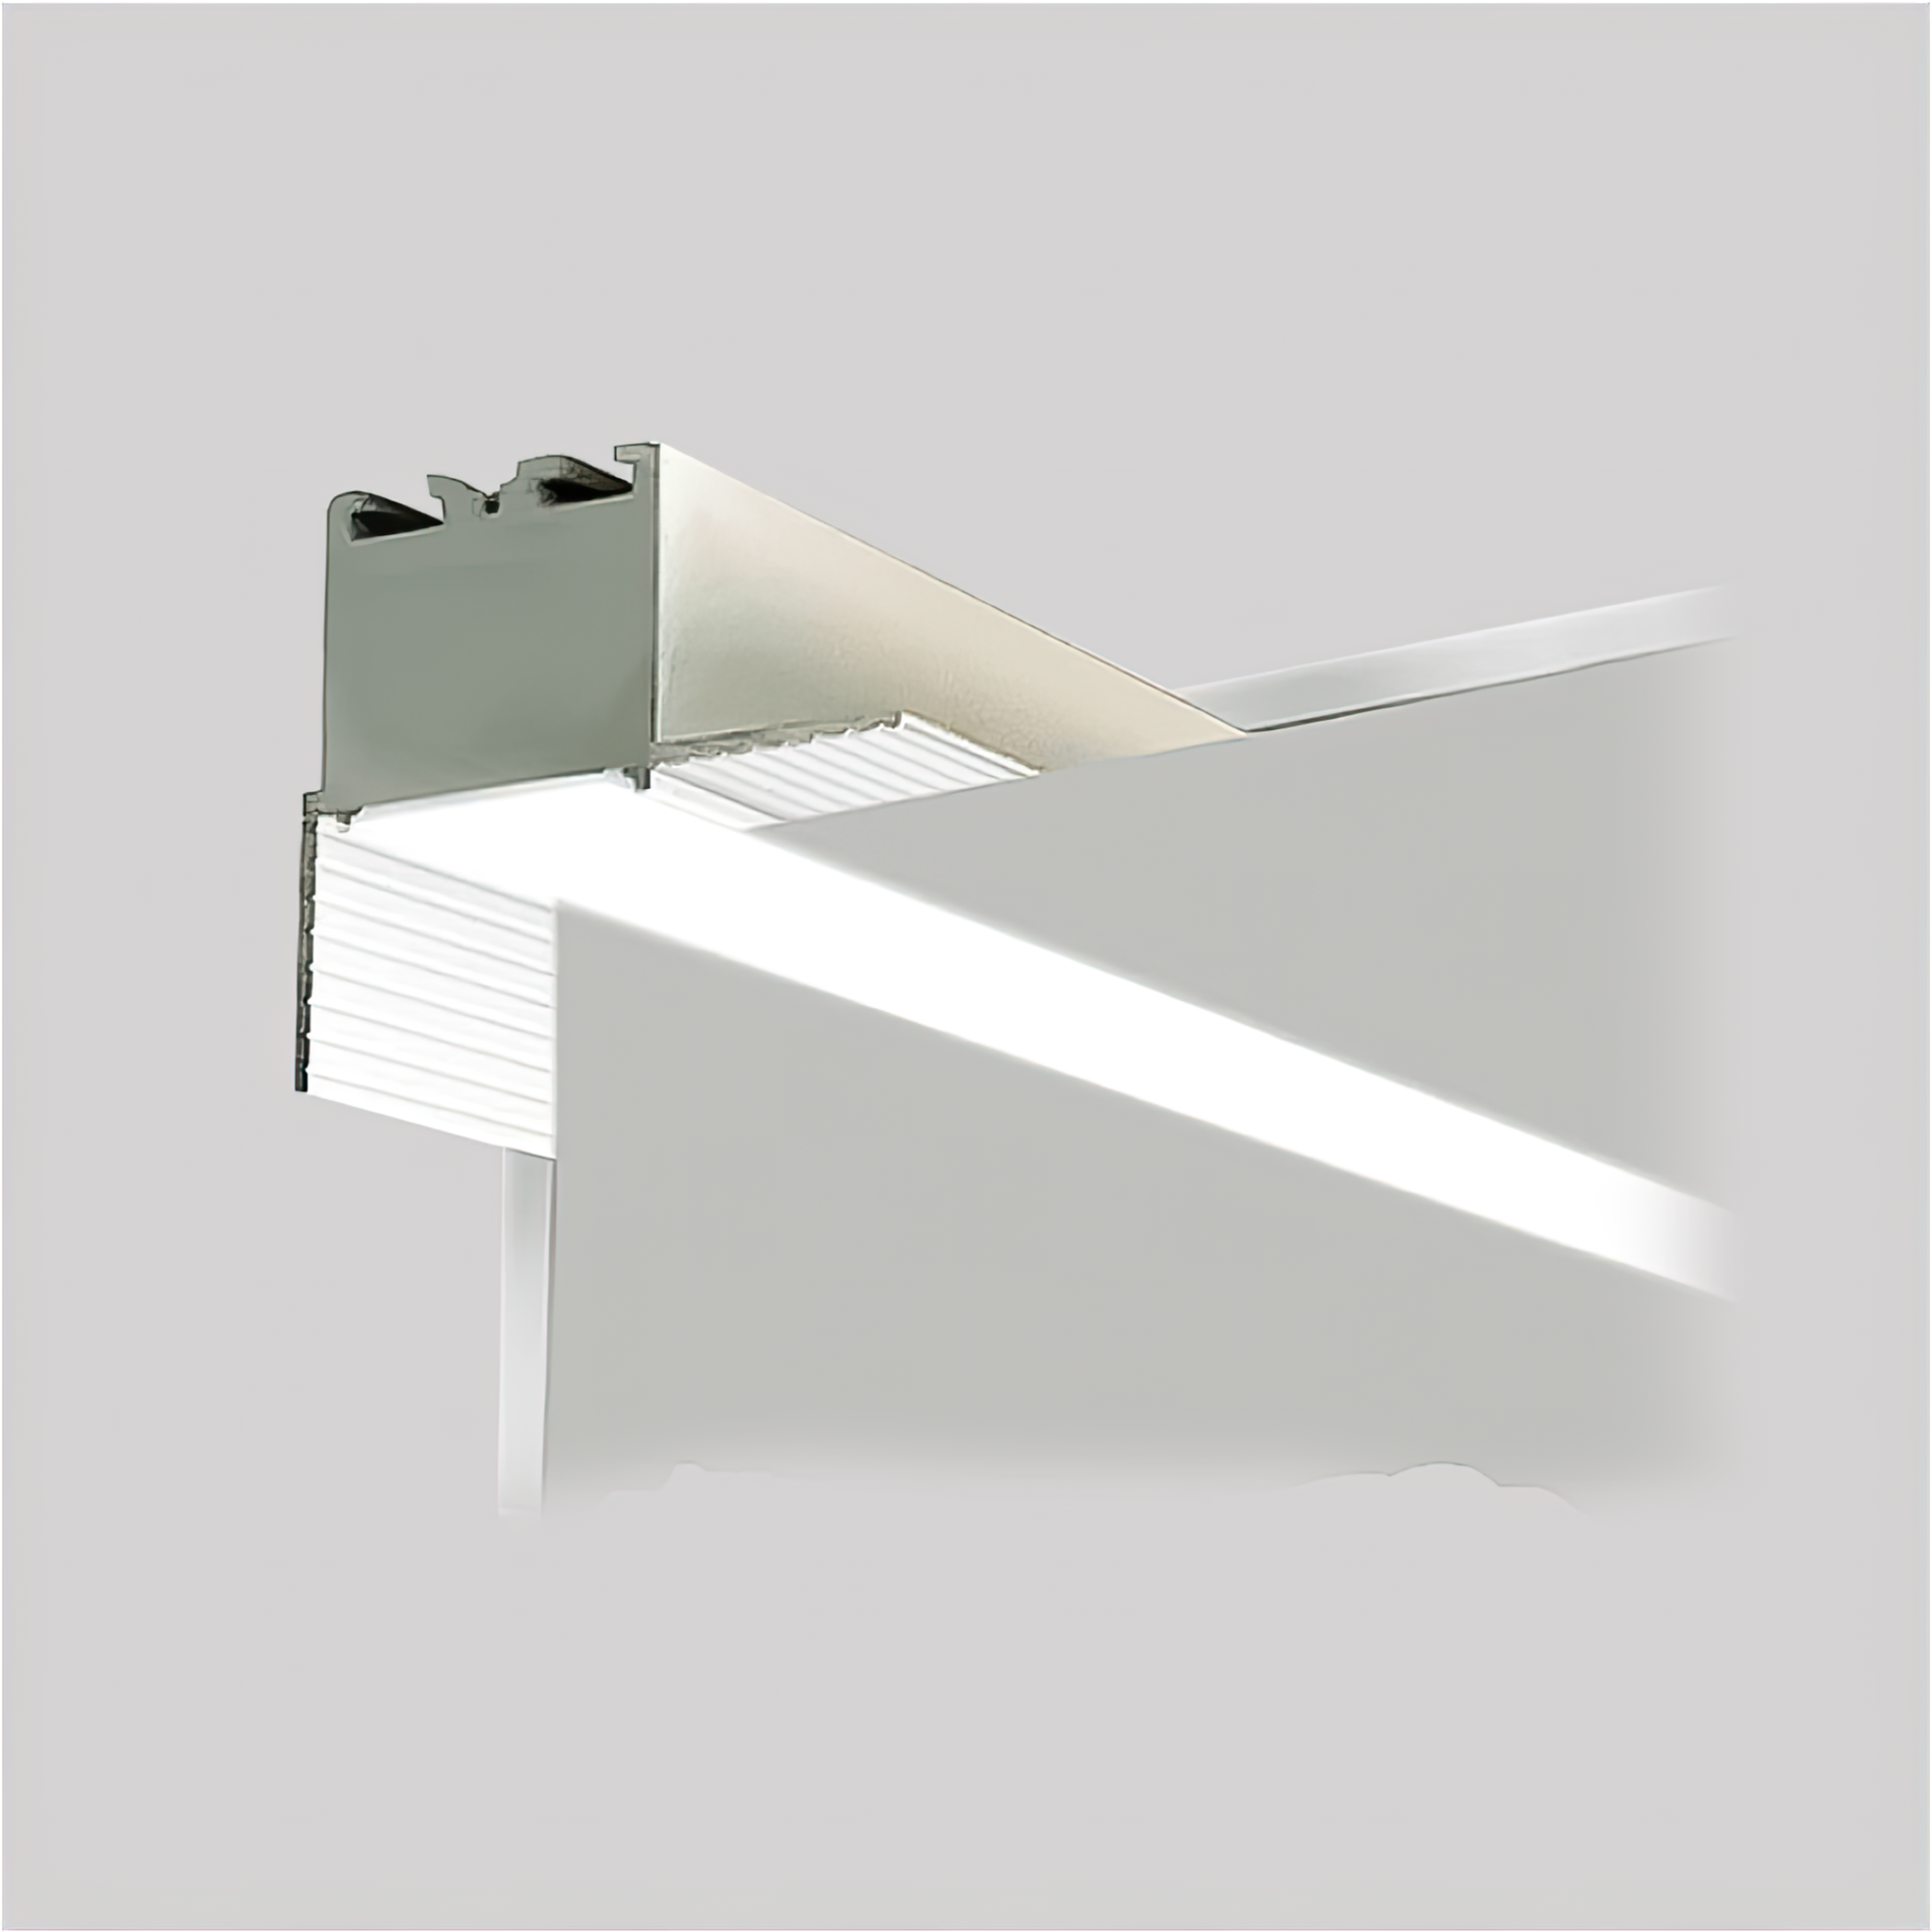 0.8-Inch Wet-Listed Recessed Linear LED Luminaire